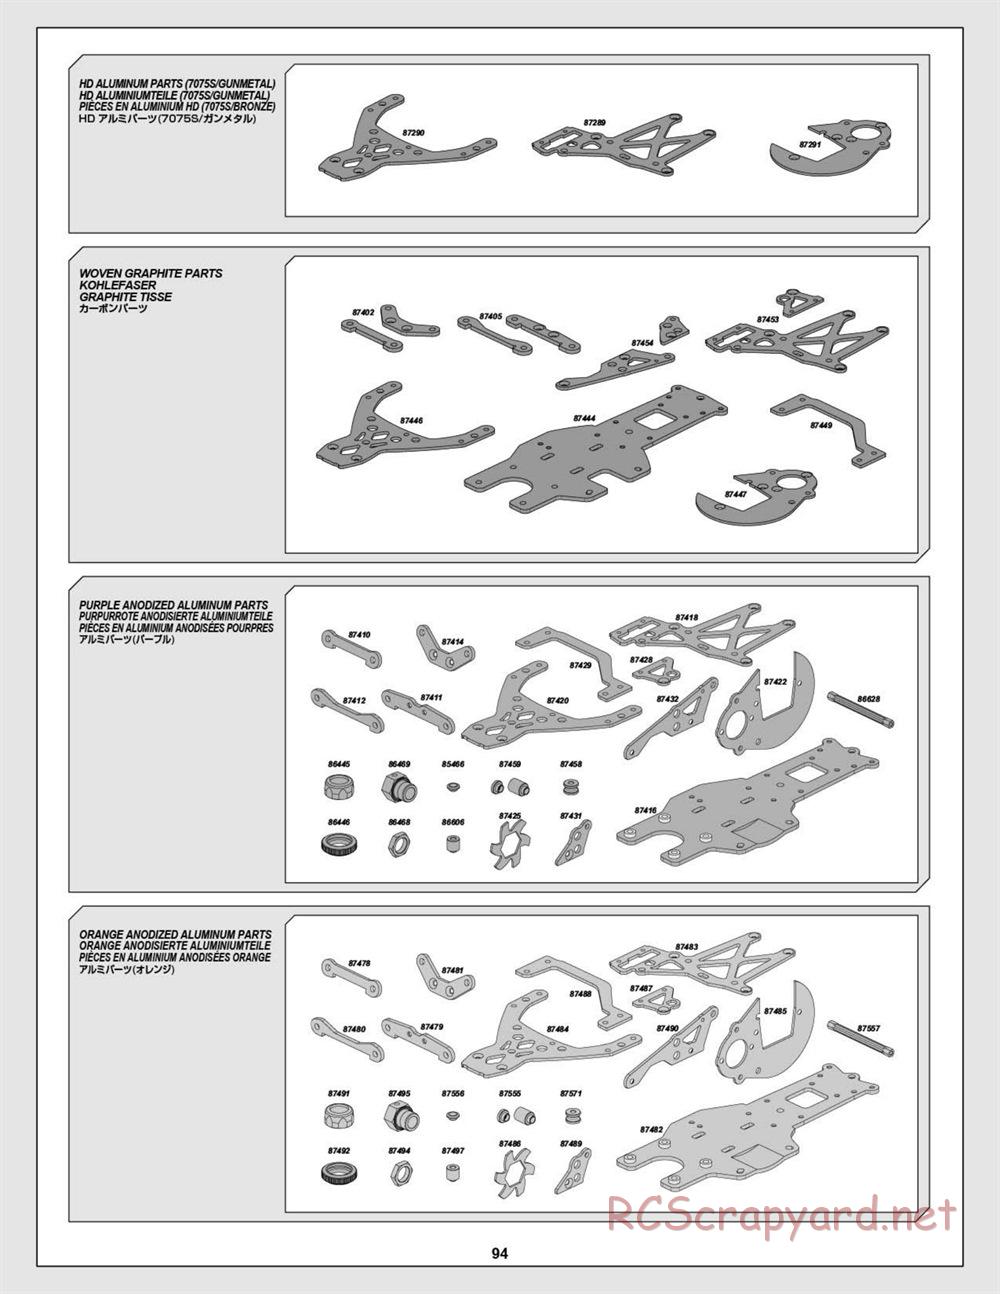 HPI - Baja 5T - Exploded View - Page 94